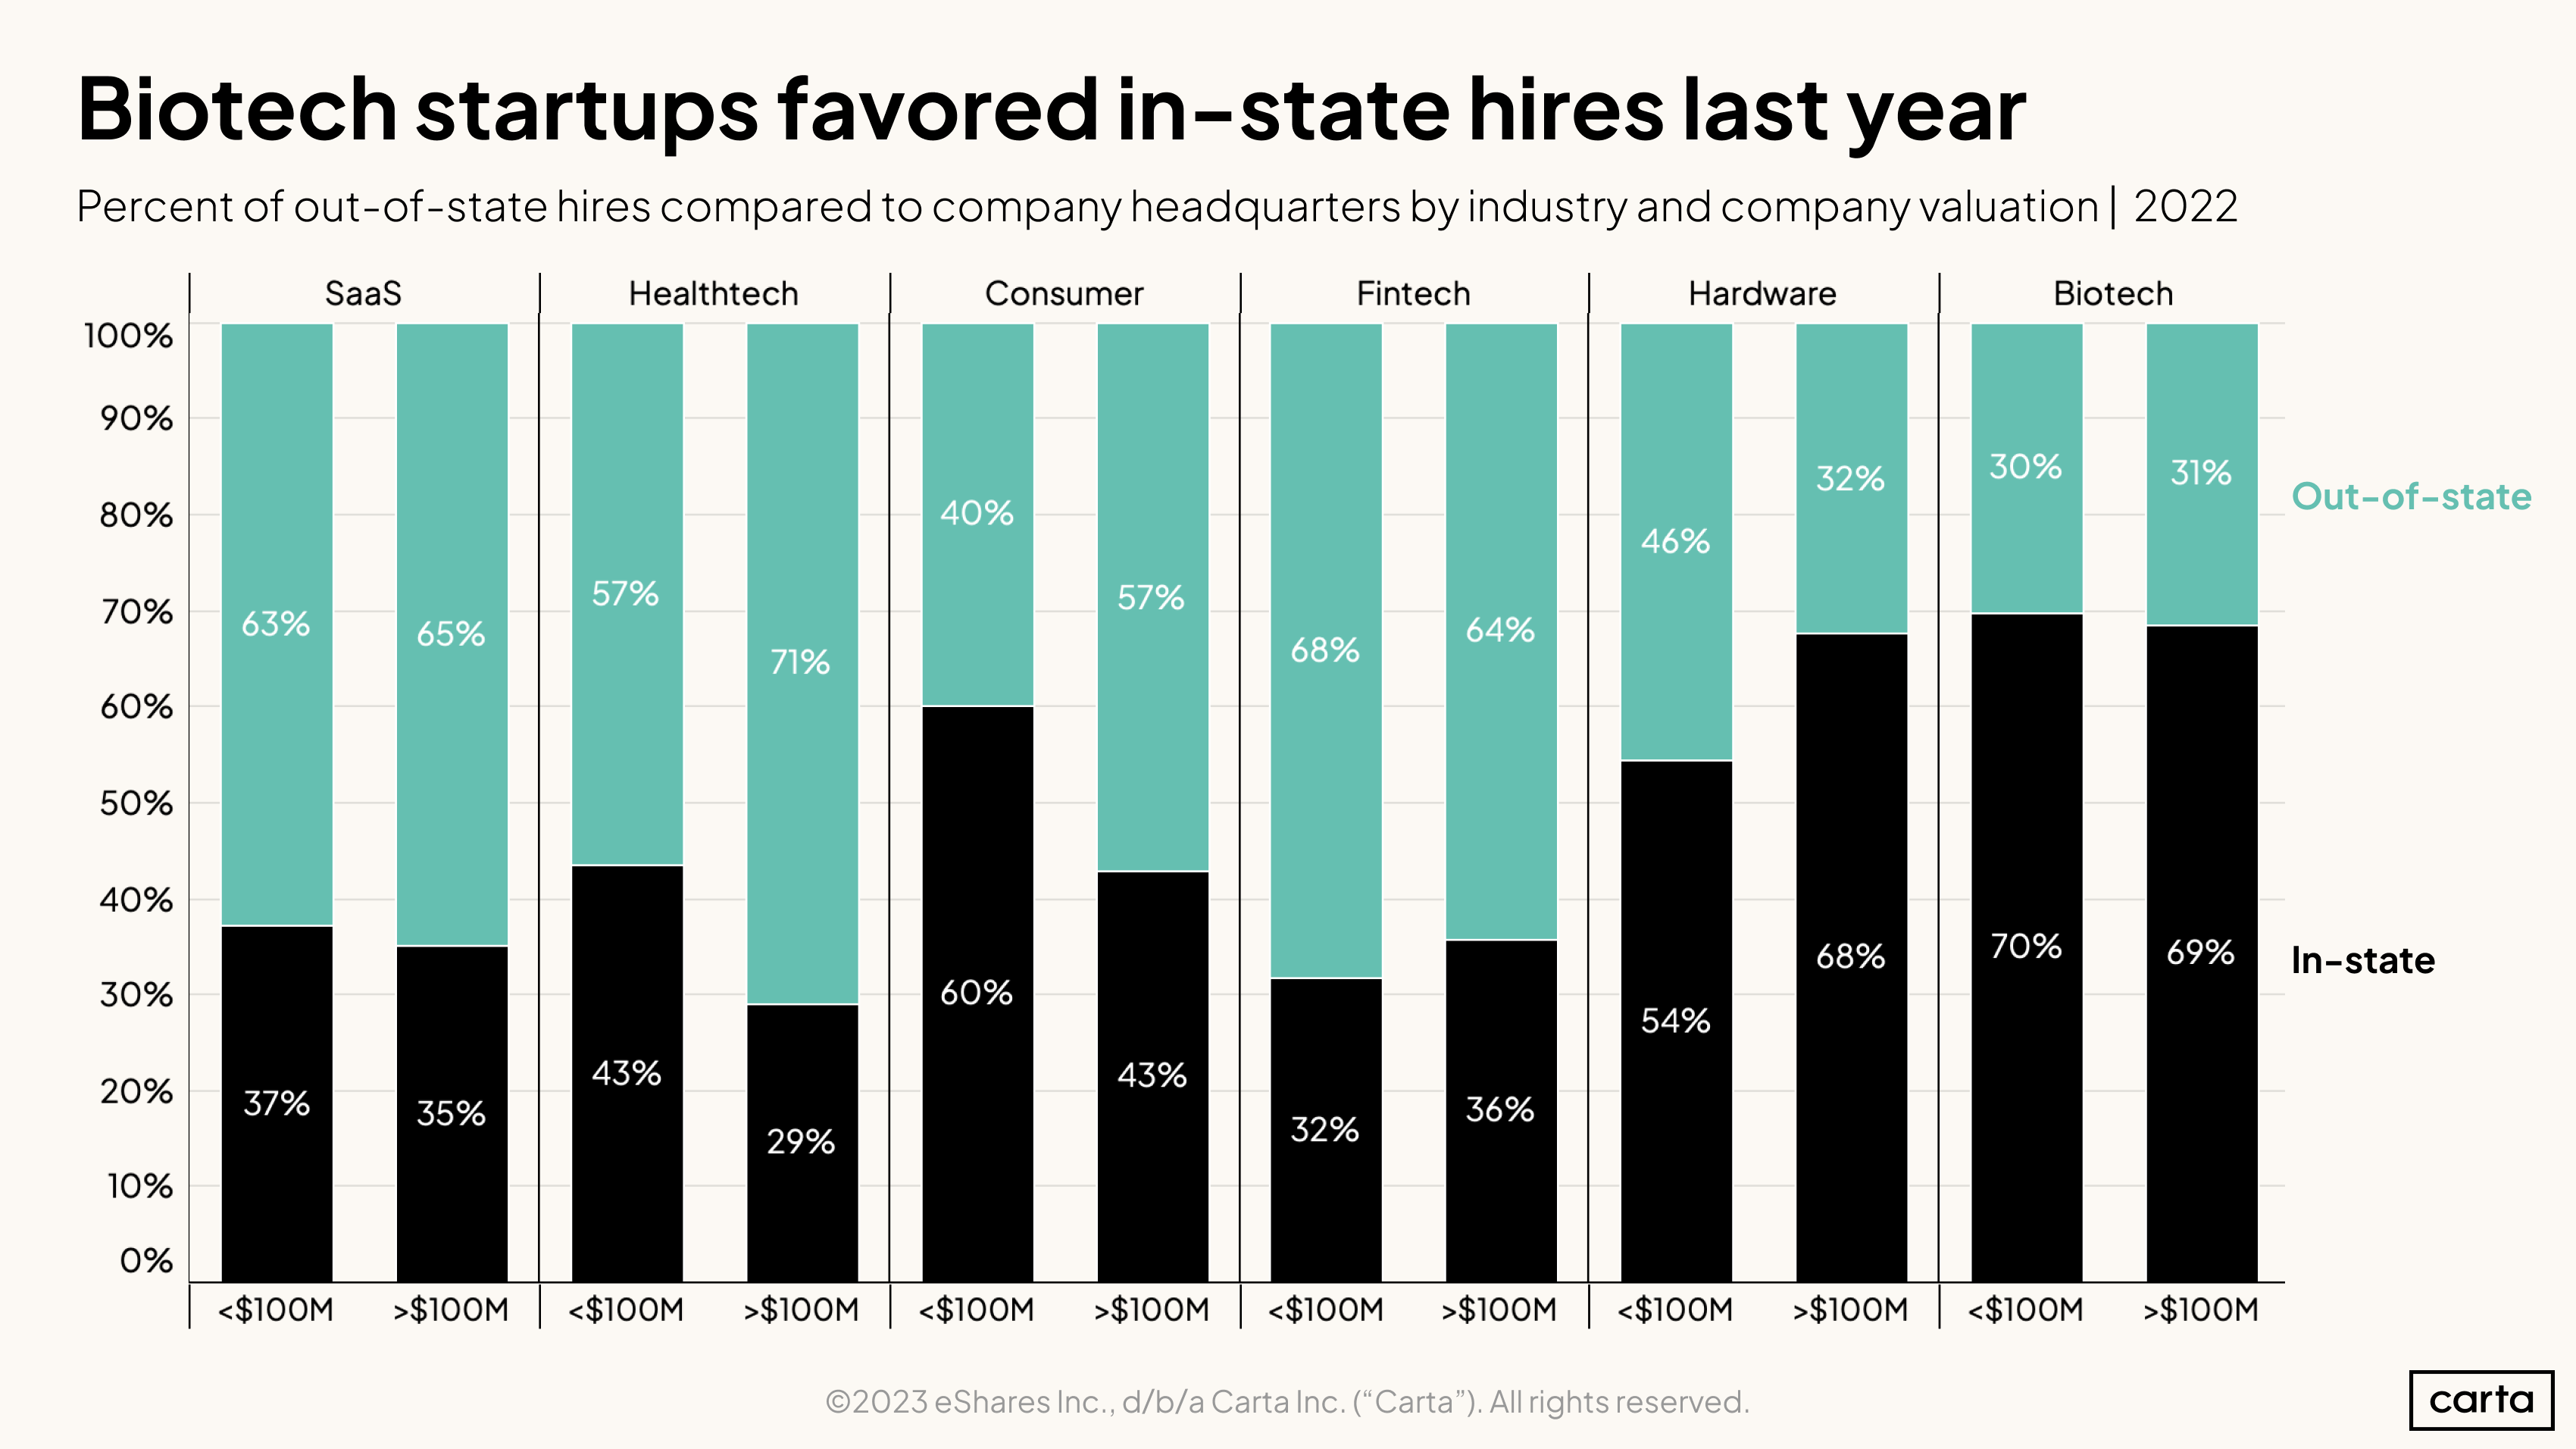 Percent of out-of-state hires compared to company headquarters by industry and company valuation, 2022